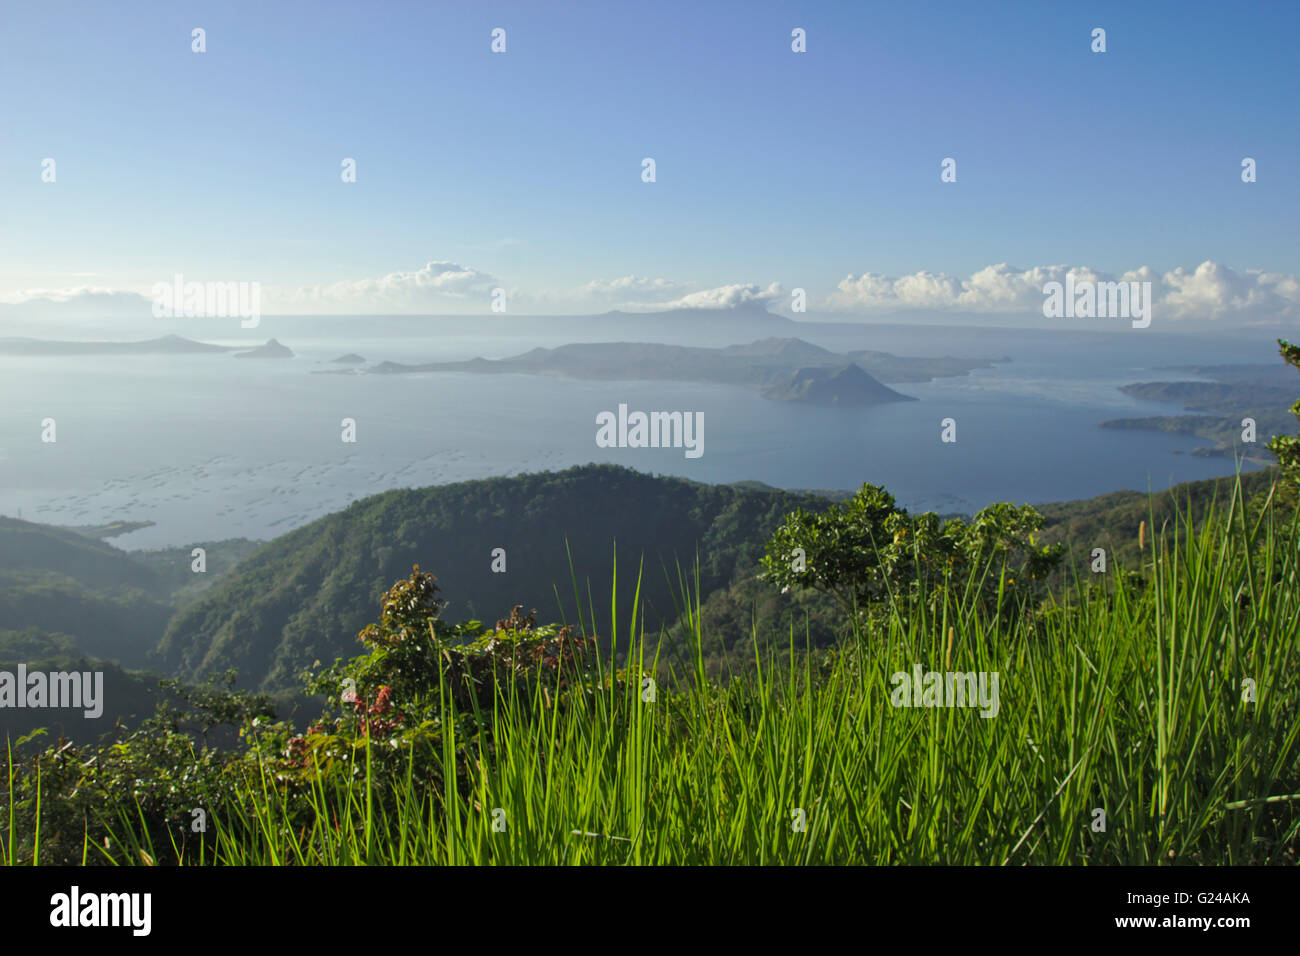 Lake Taal and Taal volcano from Tagaytay, Luzon, Philippines Stock Photo